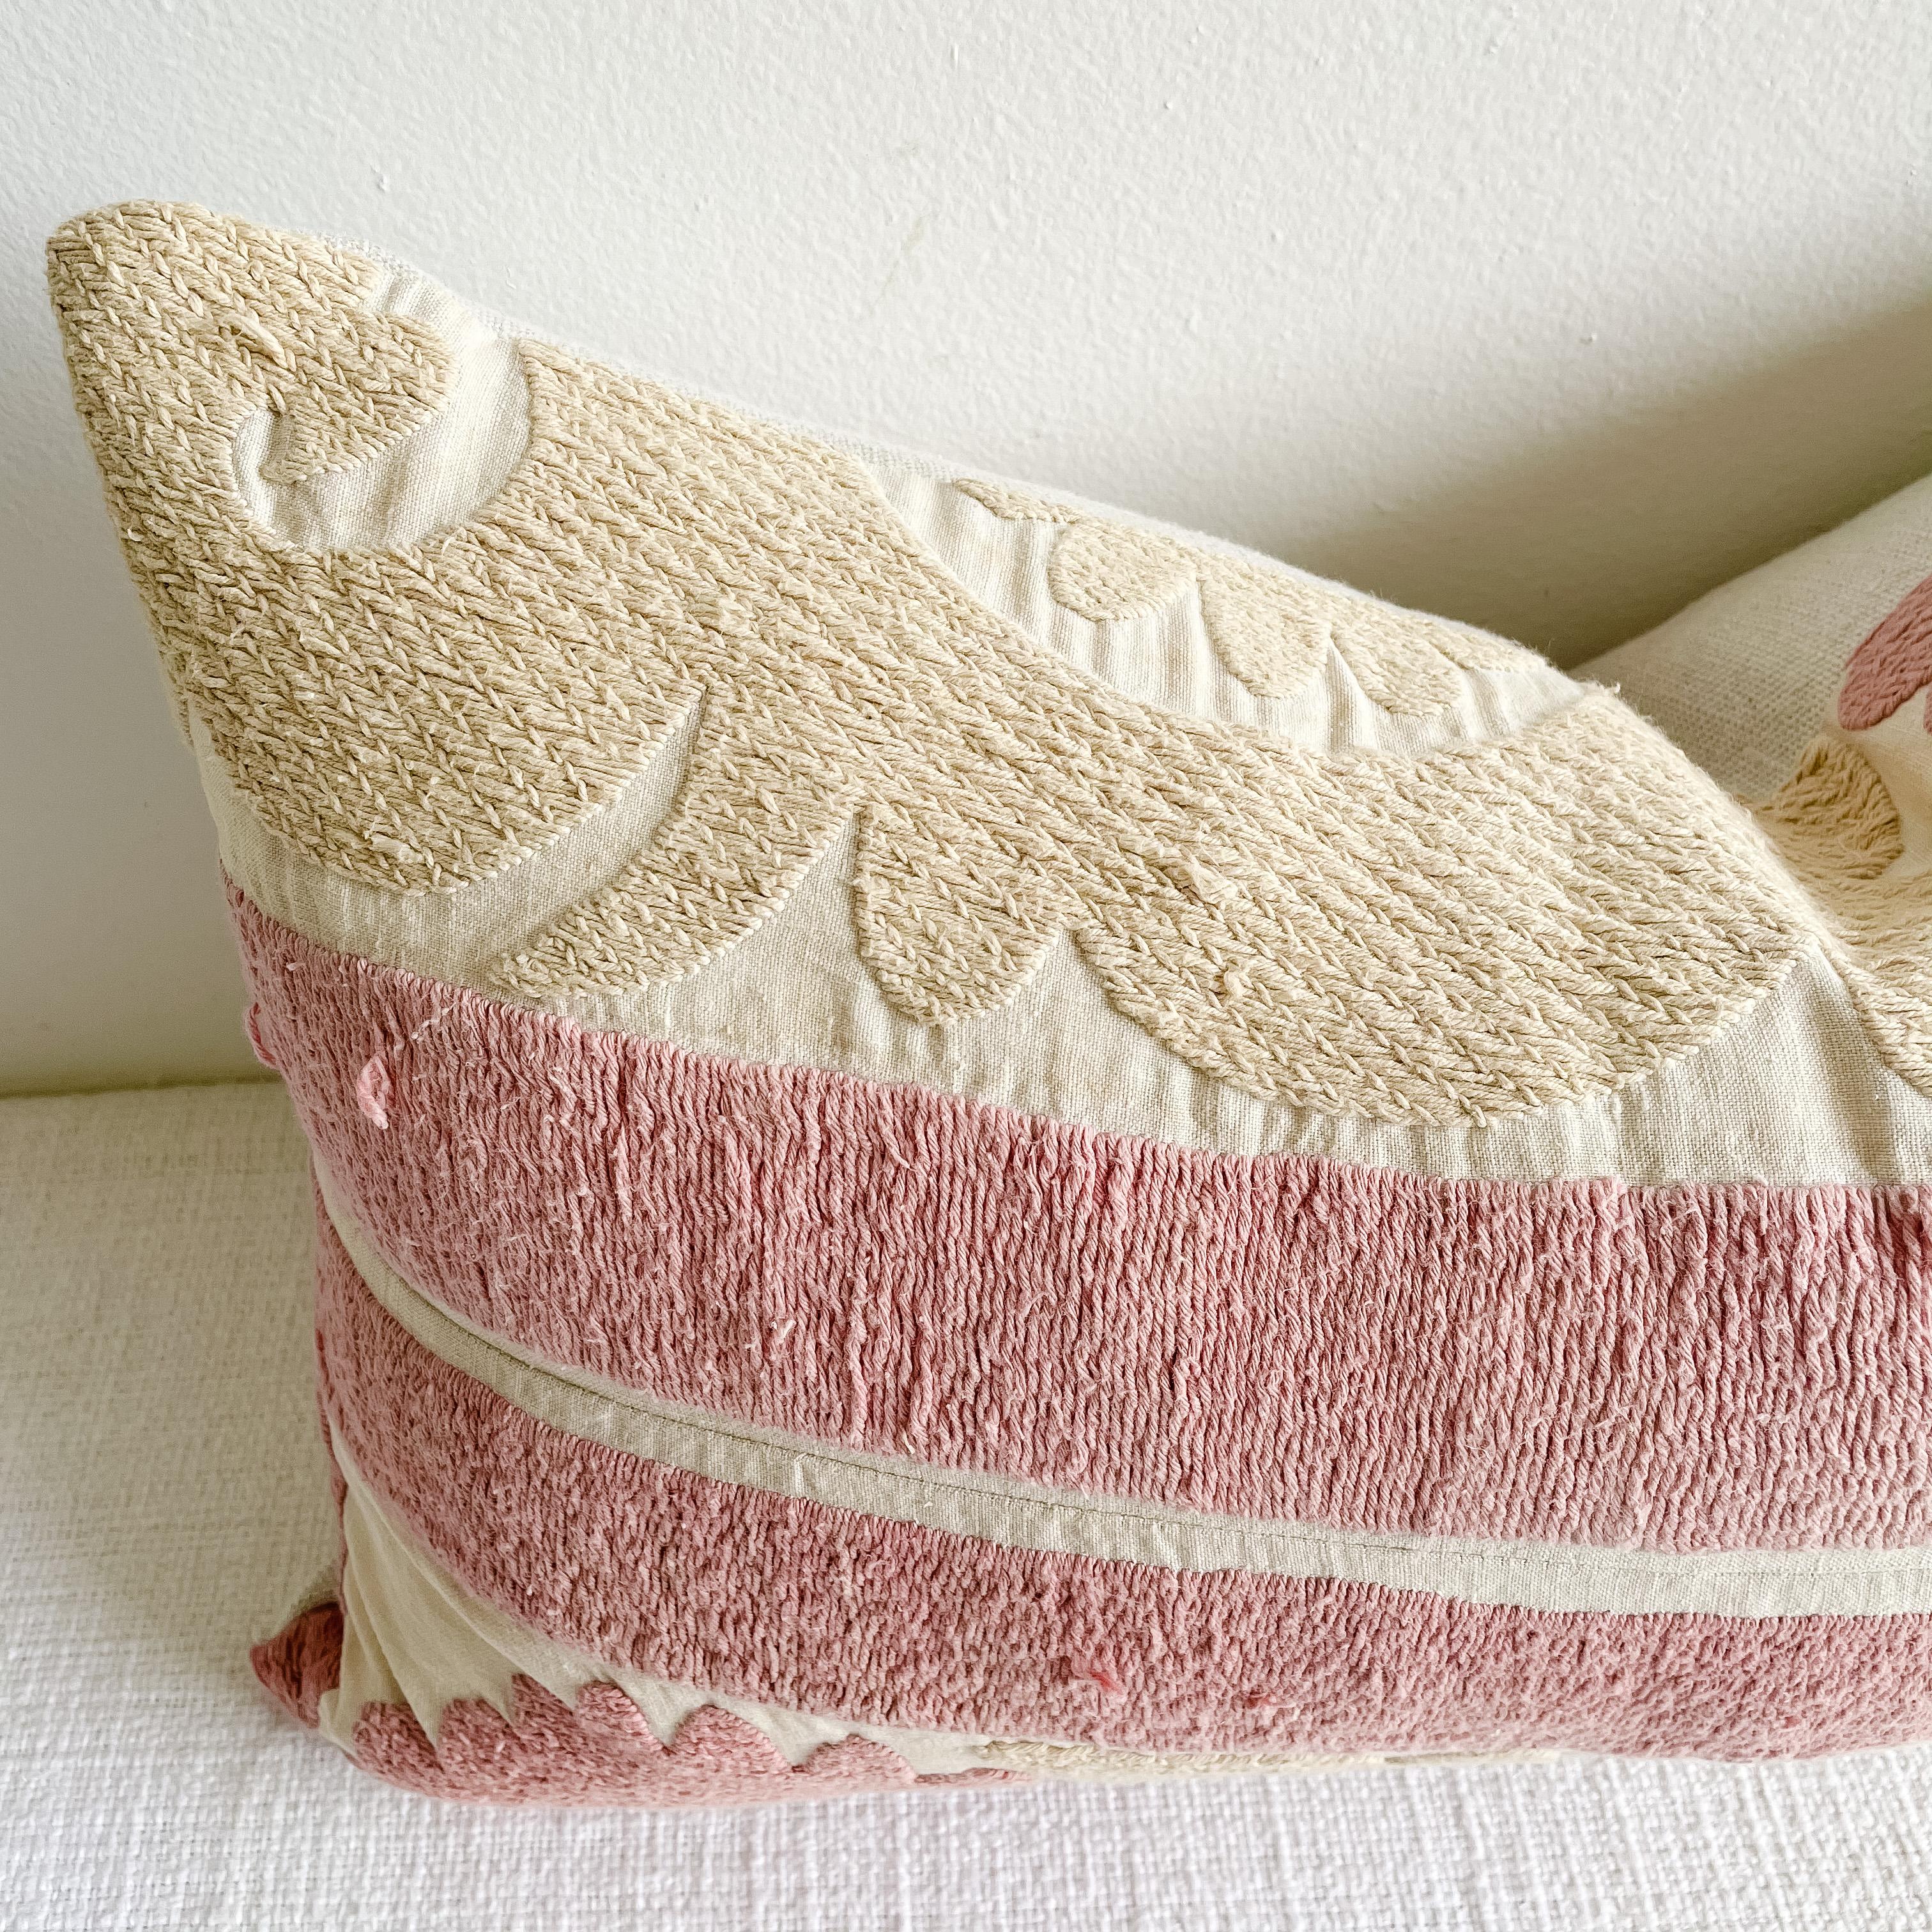 Vintage pale pink and tan embroidered Suzani on a natural muslin background. This vintage textile pillow face features a vintage suzann quilt, natural linen colored background with original hand embroidery. The backing is 100% Belgian linen in